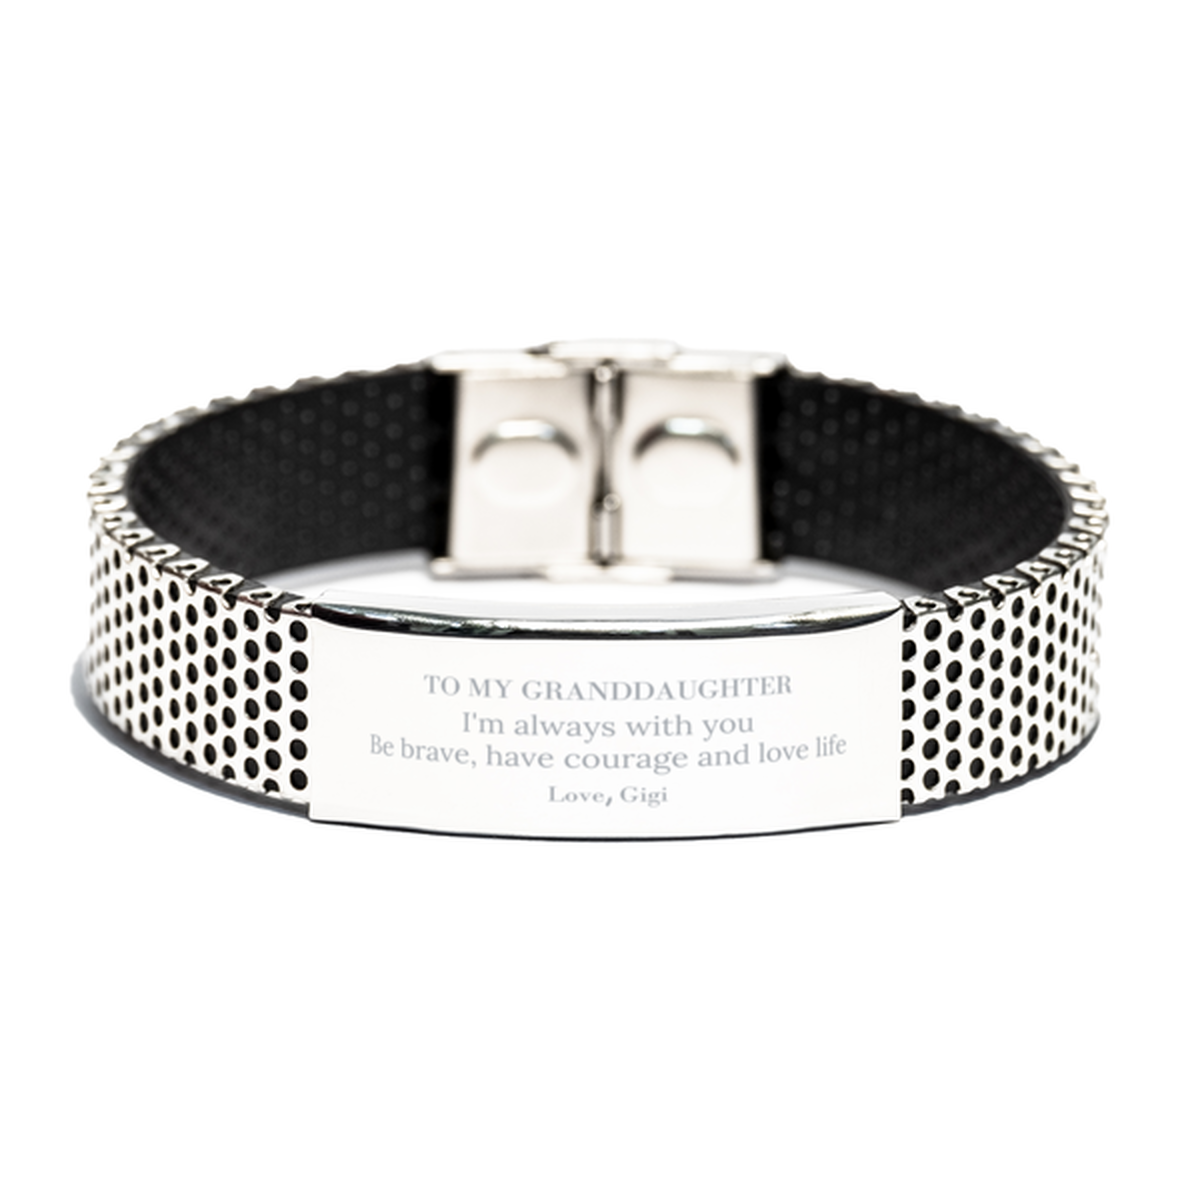 To My Granddaughter Gifts from Gigi, Unique Stainless Steel Bracelet Inspirational Christmas Birthday Graduation Gifts for Granddaughter I'm always with you. Be brave, have courage and love life. Love, Gigi